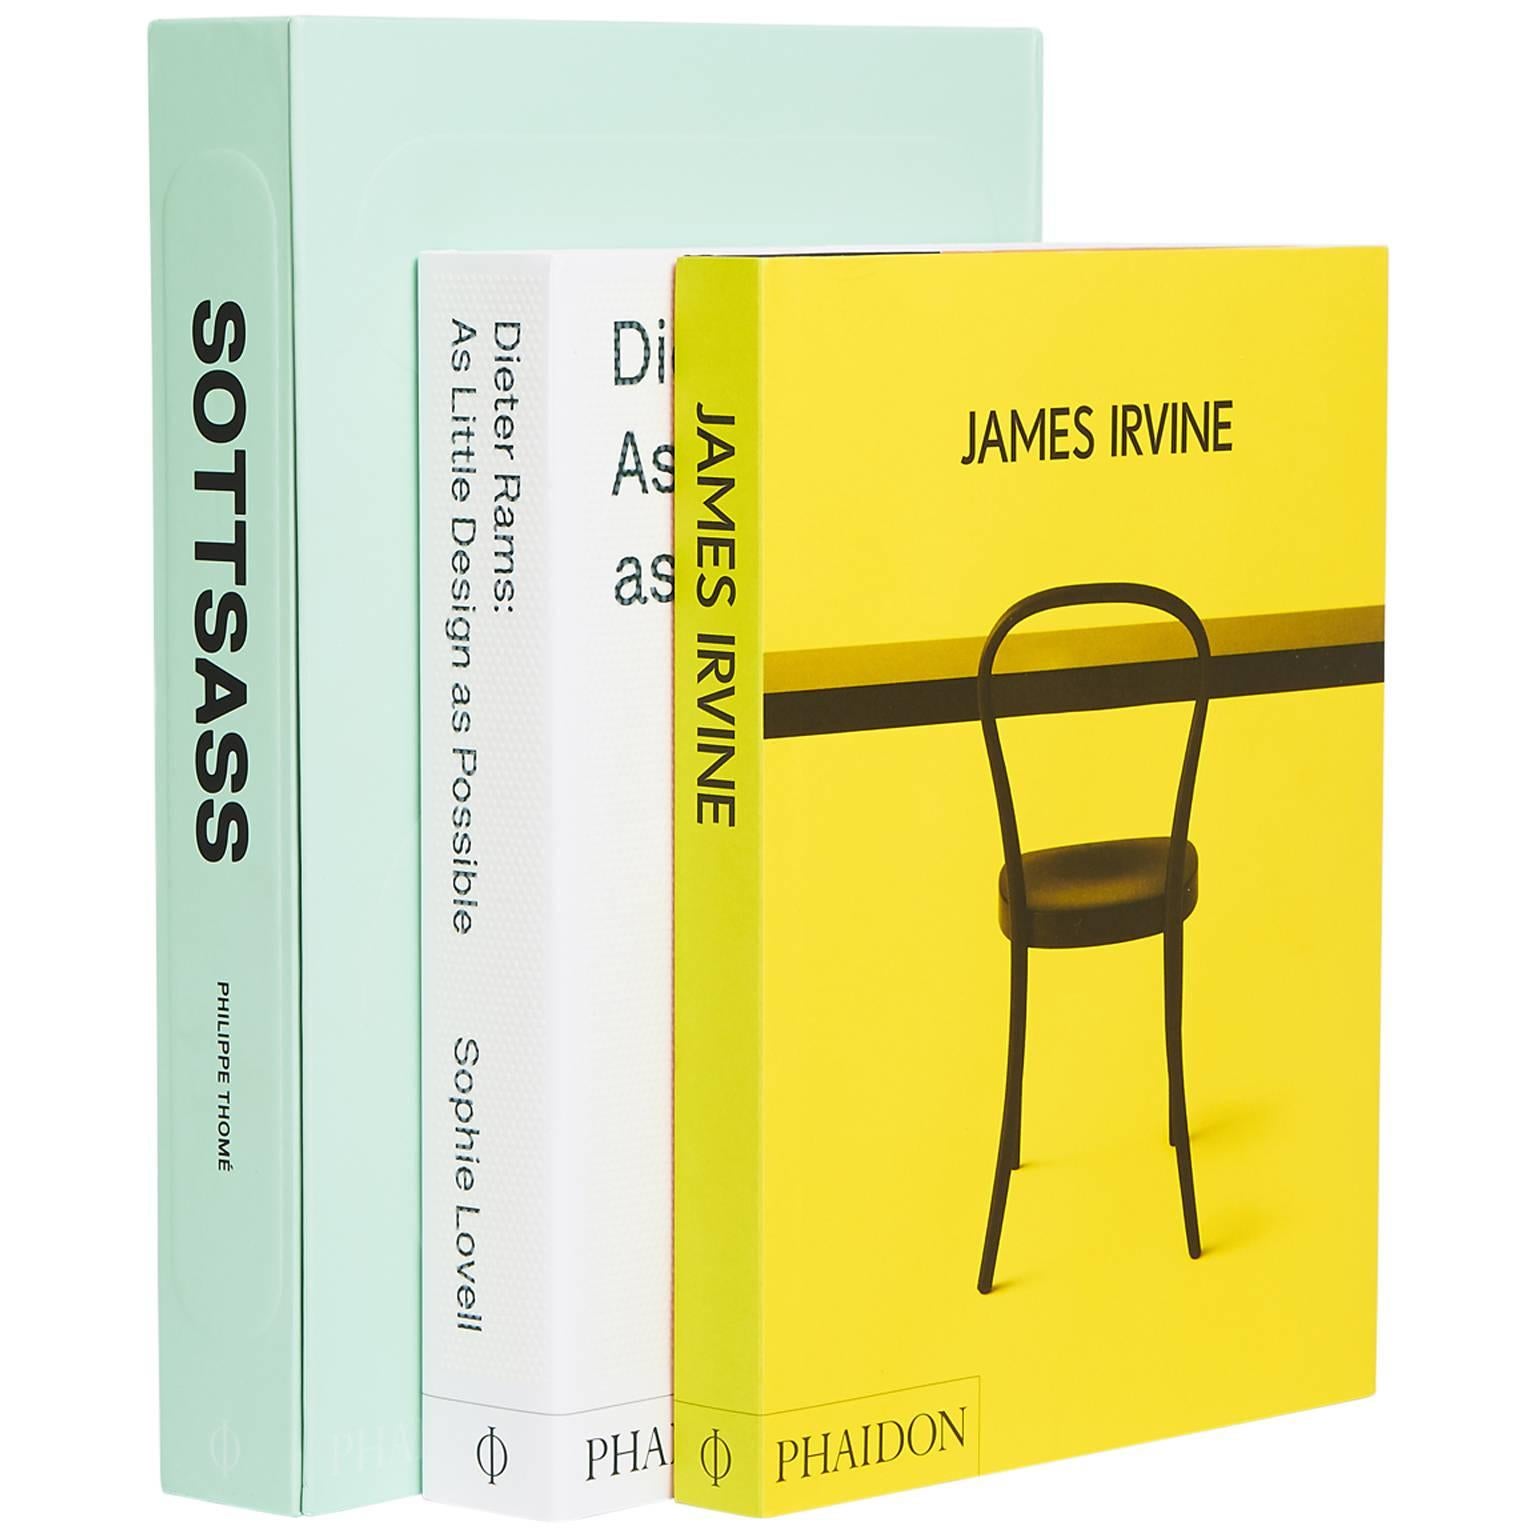 Masters of Design Book Collection Ettore Sottsass James Irvine Dieter Rams